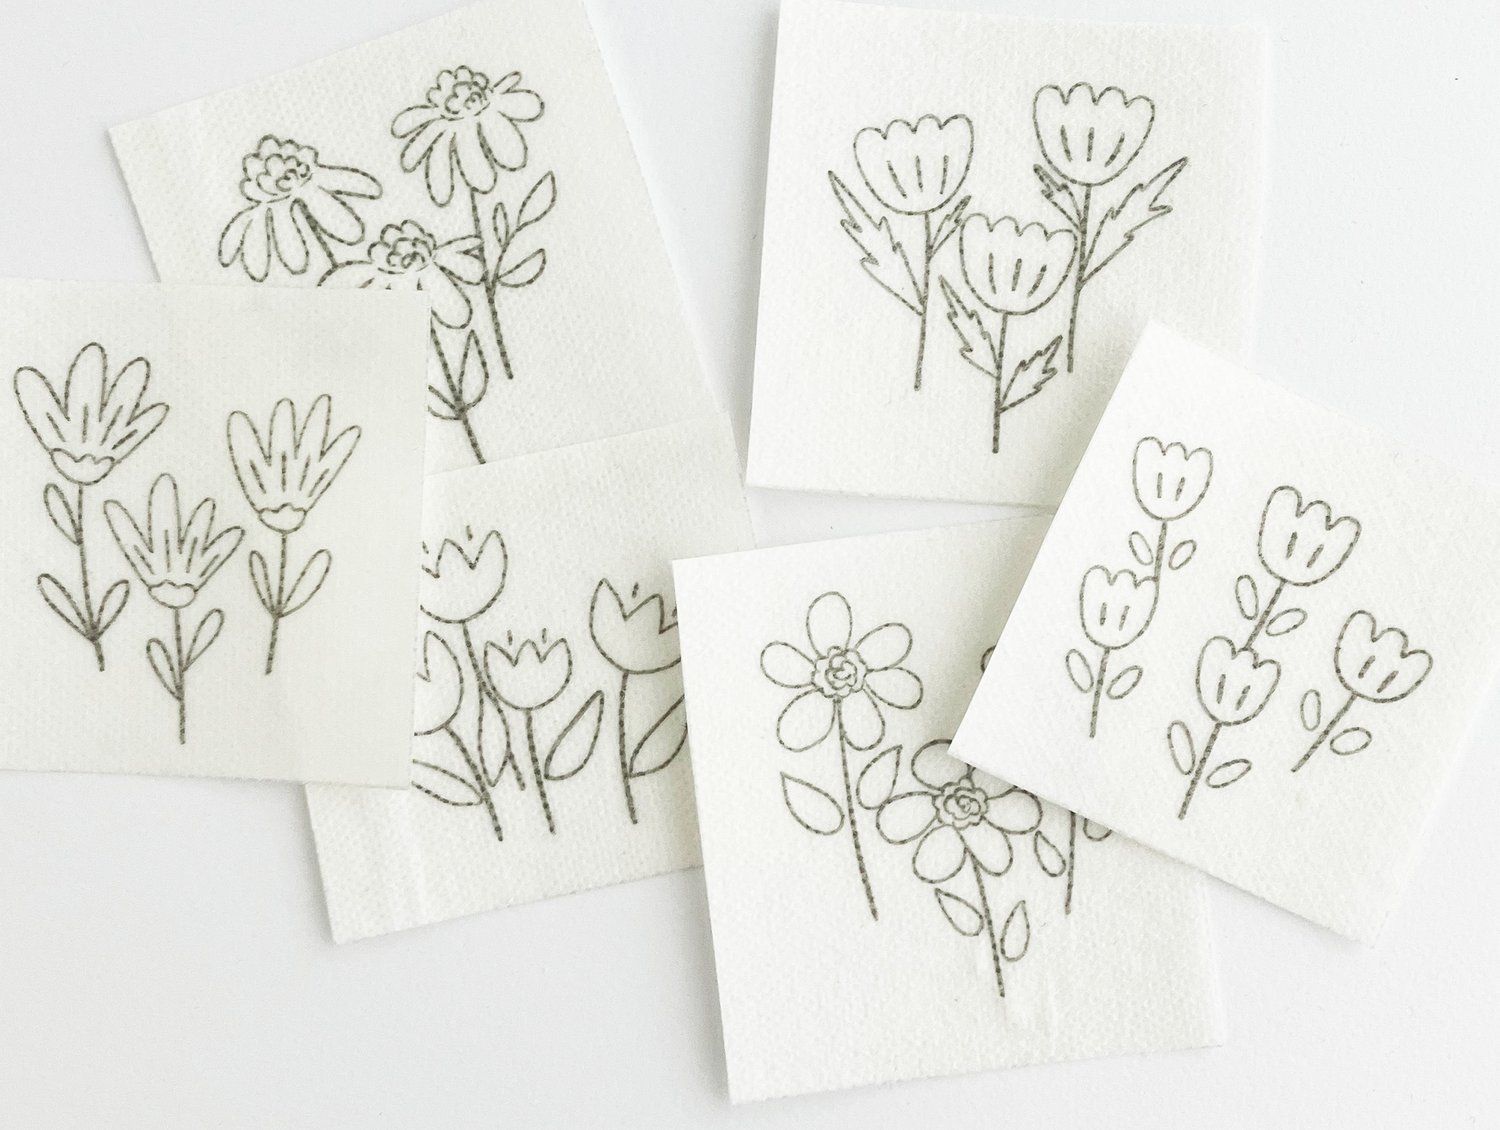 Stitching with Water-Soluble Paper, wildolive